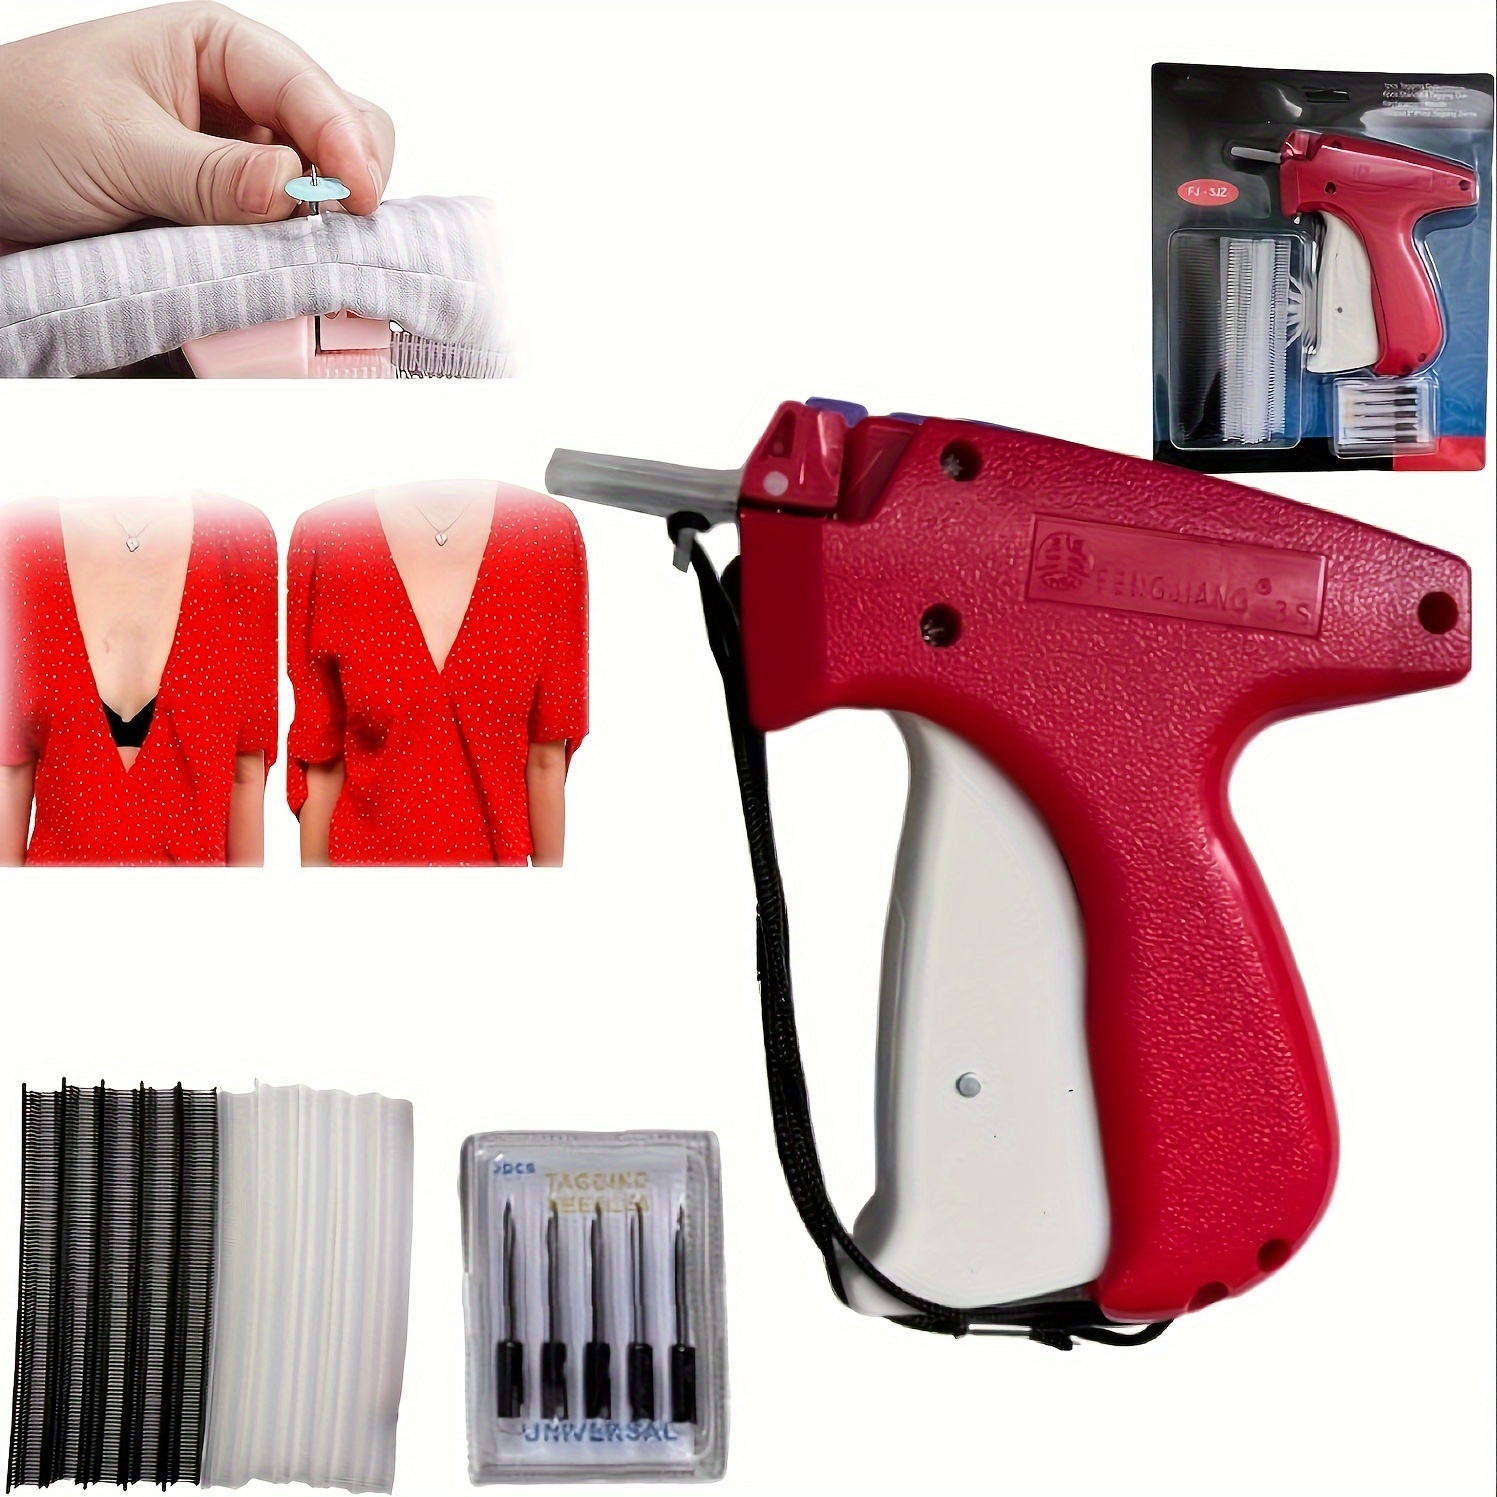 

Instant Fix Micro Stitch Gun - Portable Clothing Repair Tool For Quickhemming, Quilt Tacking & Tagging - Durable Sewing Gun With1000pcs Plastic Needles For Effortless, Versatile Garment Fixes